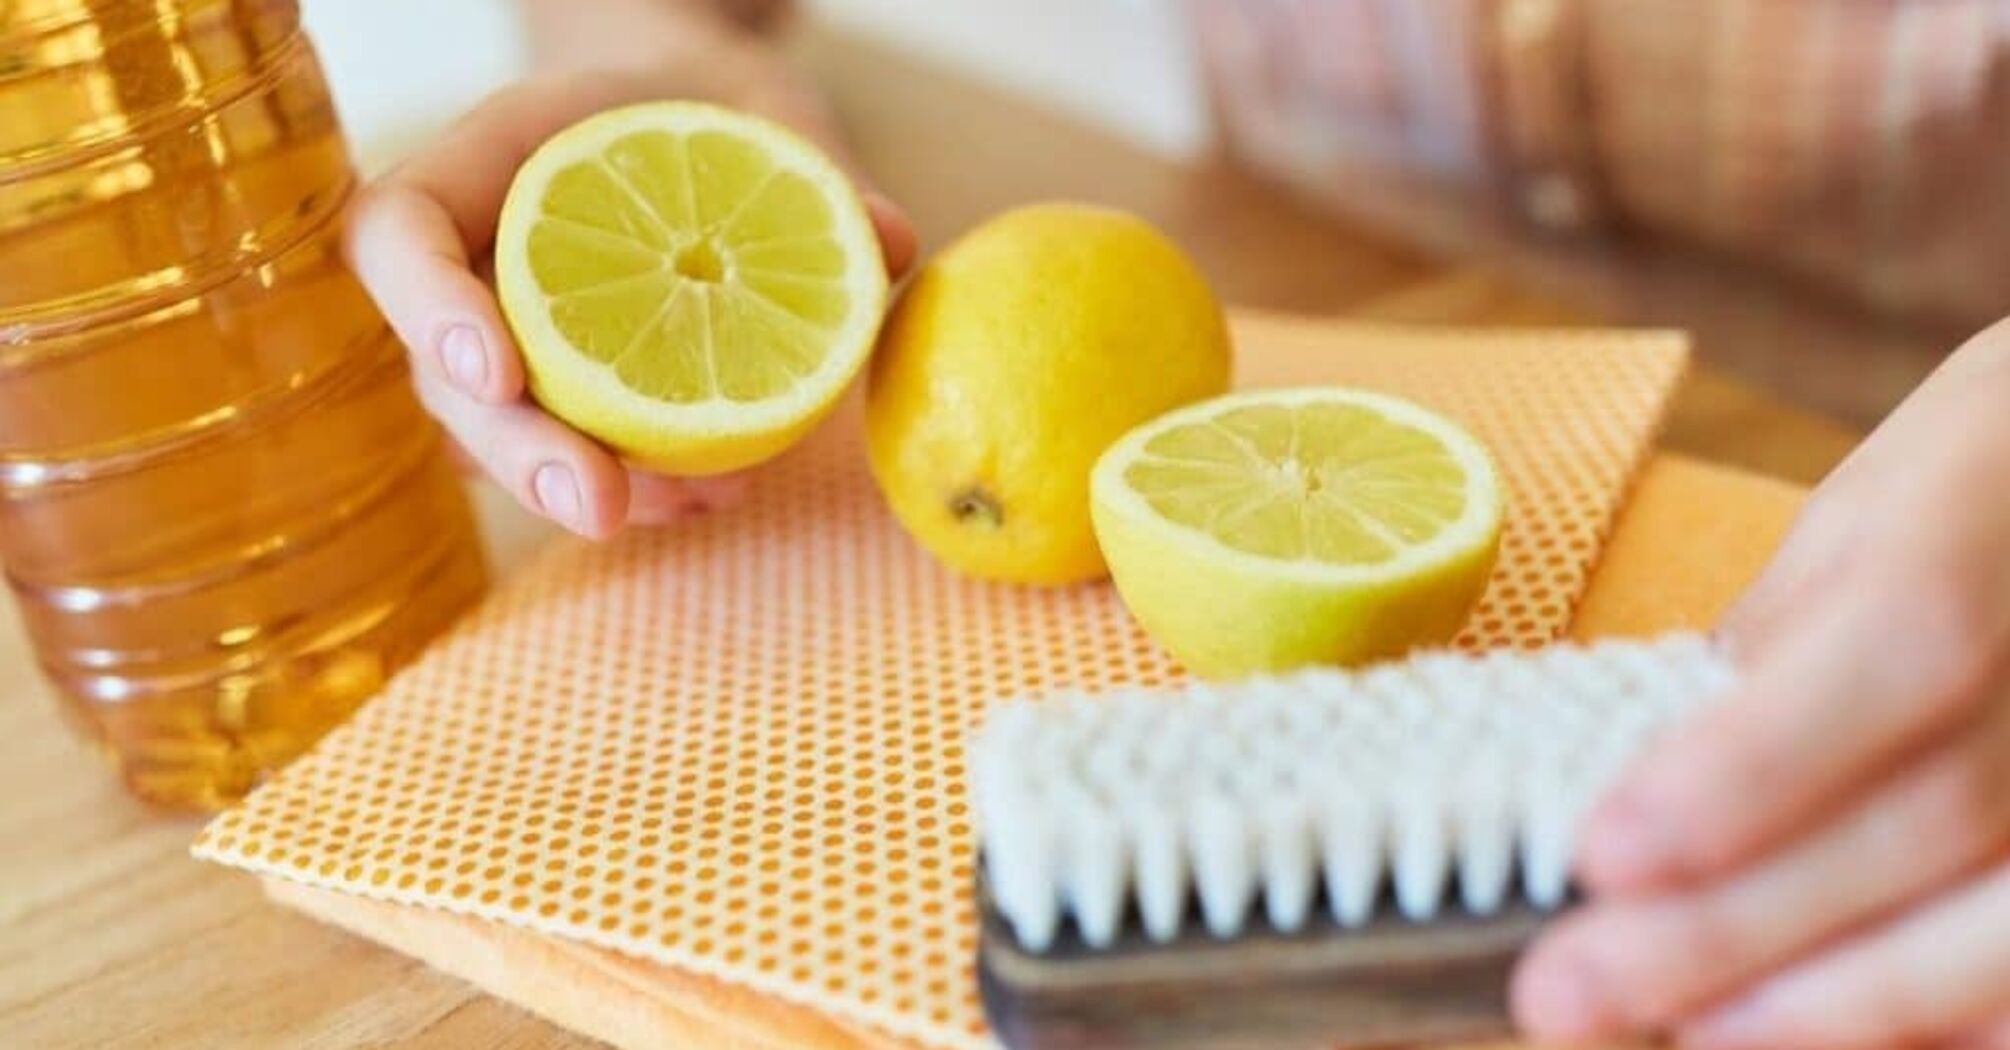 Ukrainians are advised to put a lemon in a sock before washing